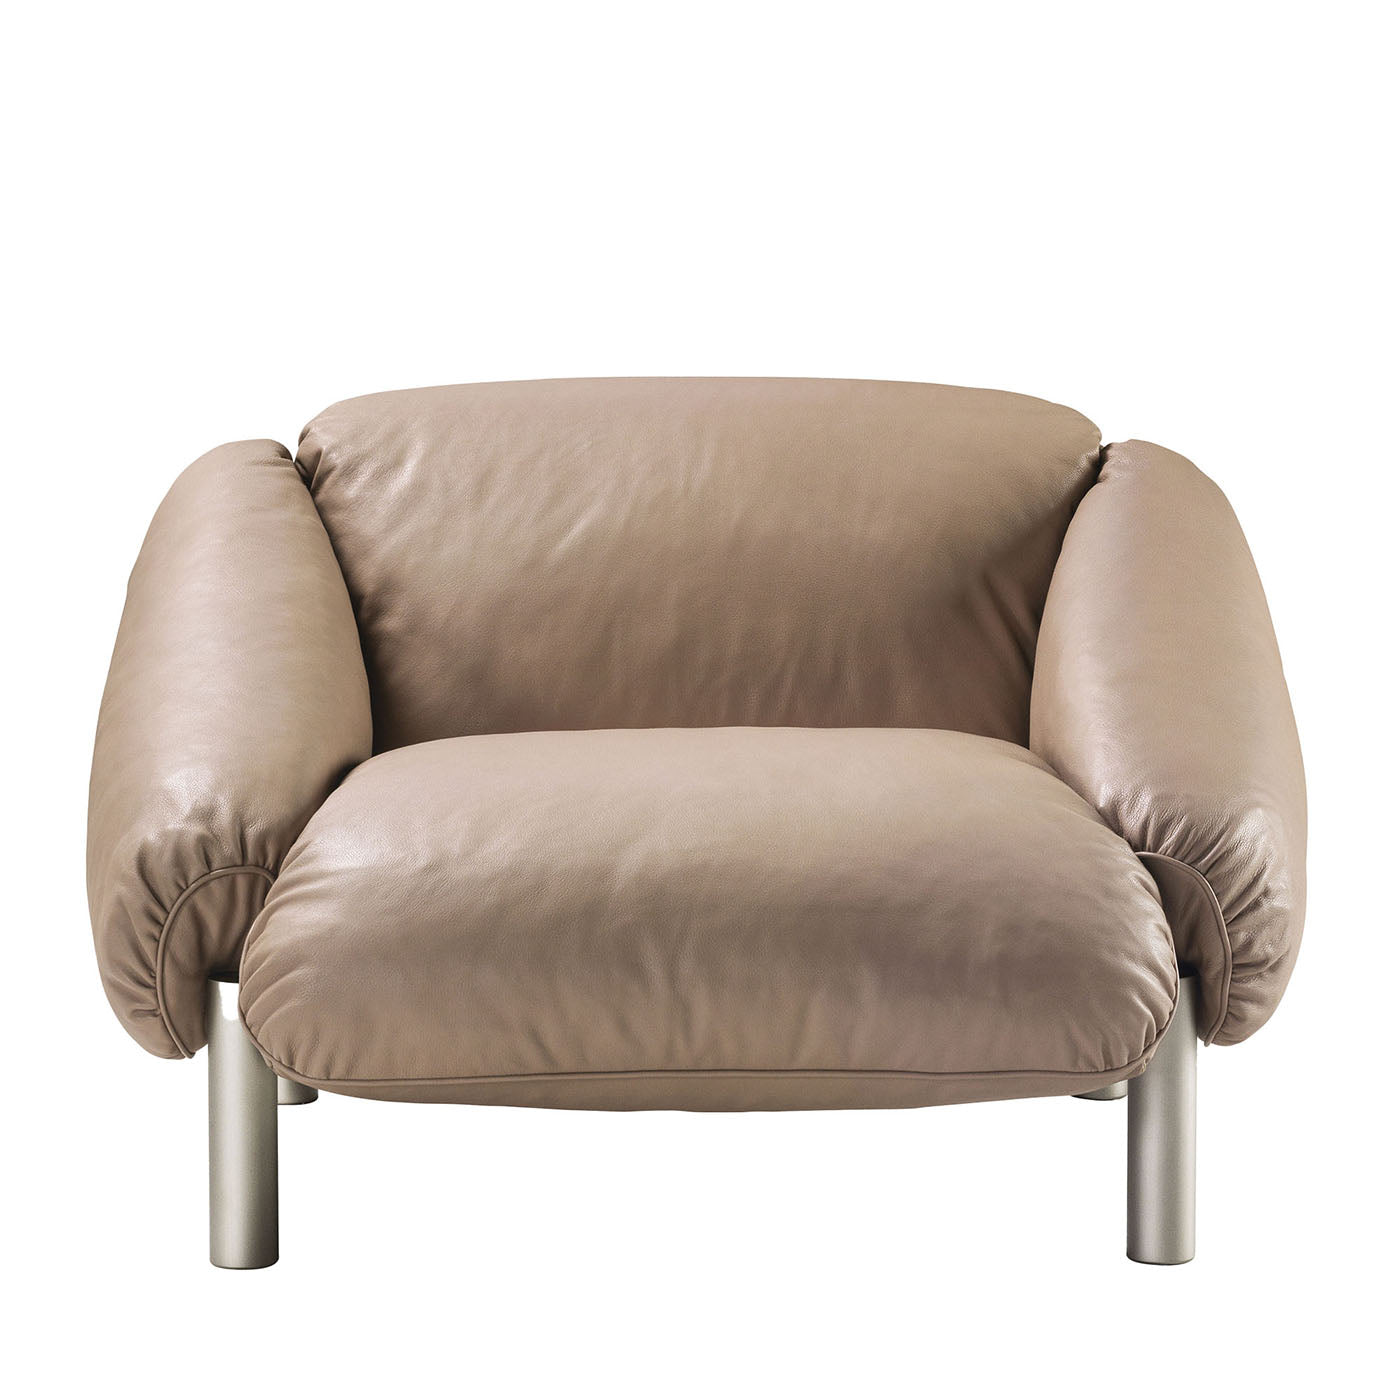 Flo Beige Leather Armchair by Lorenza Bozzoli - Main view